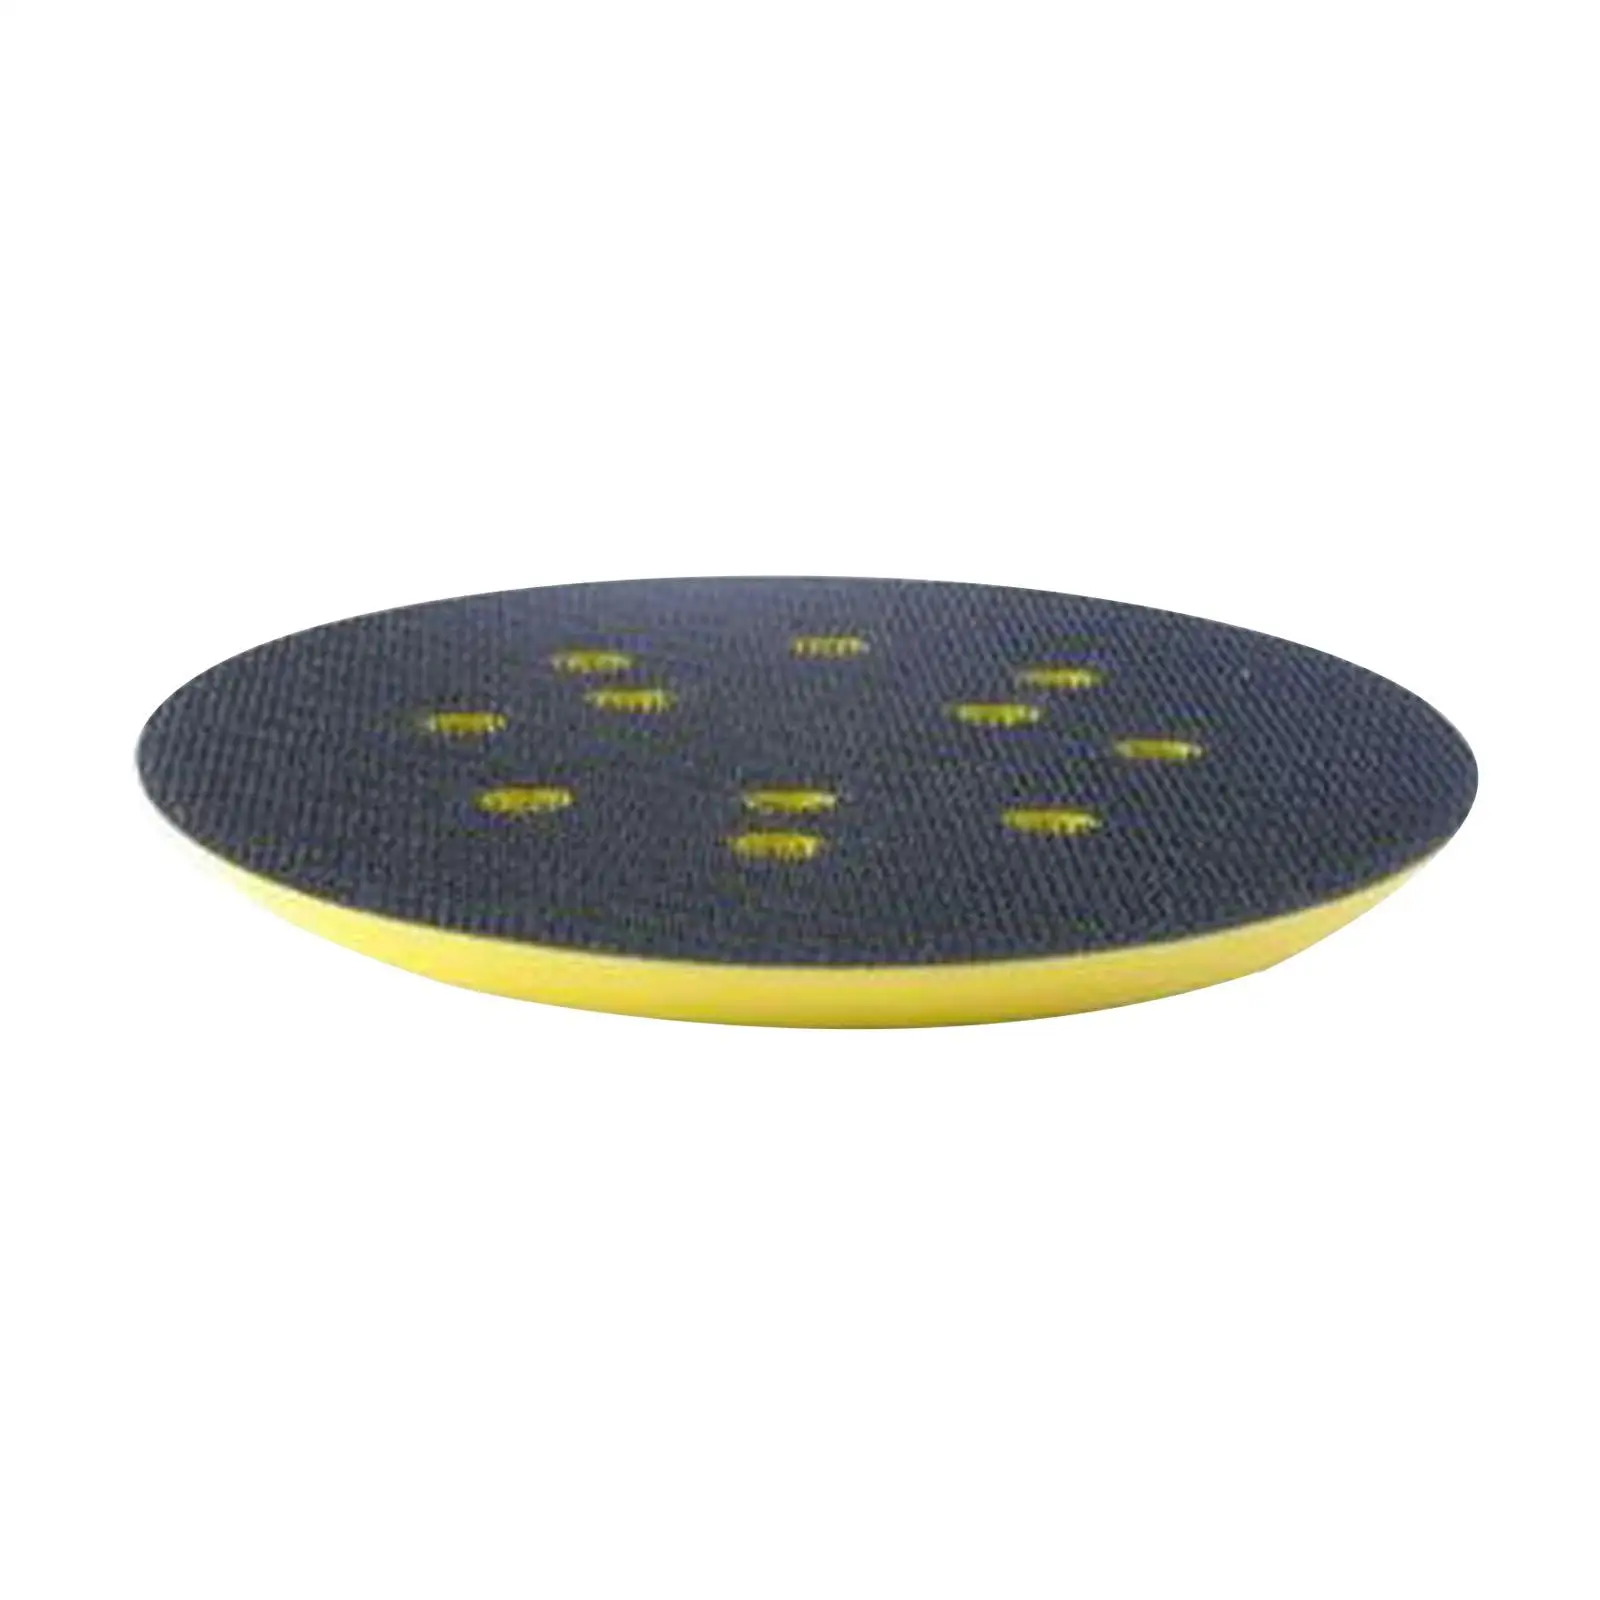 Practical Sanding Disc Pad Accs Replacement Hook Loop Backer Pads Ventilation 5 inch 125mm 8 Holes Grinding Plates for Polisher